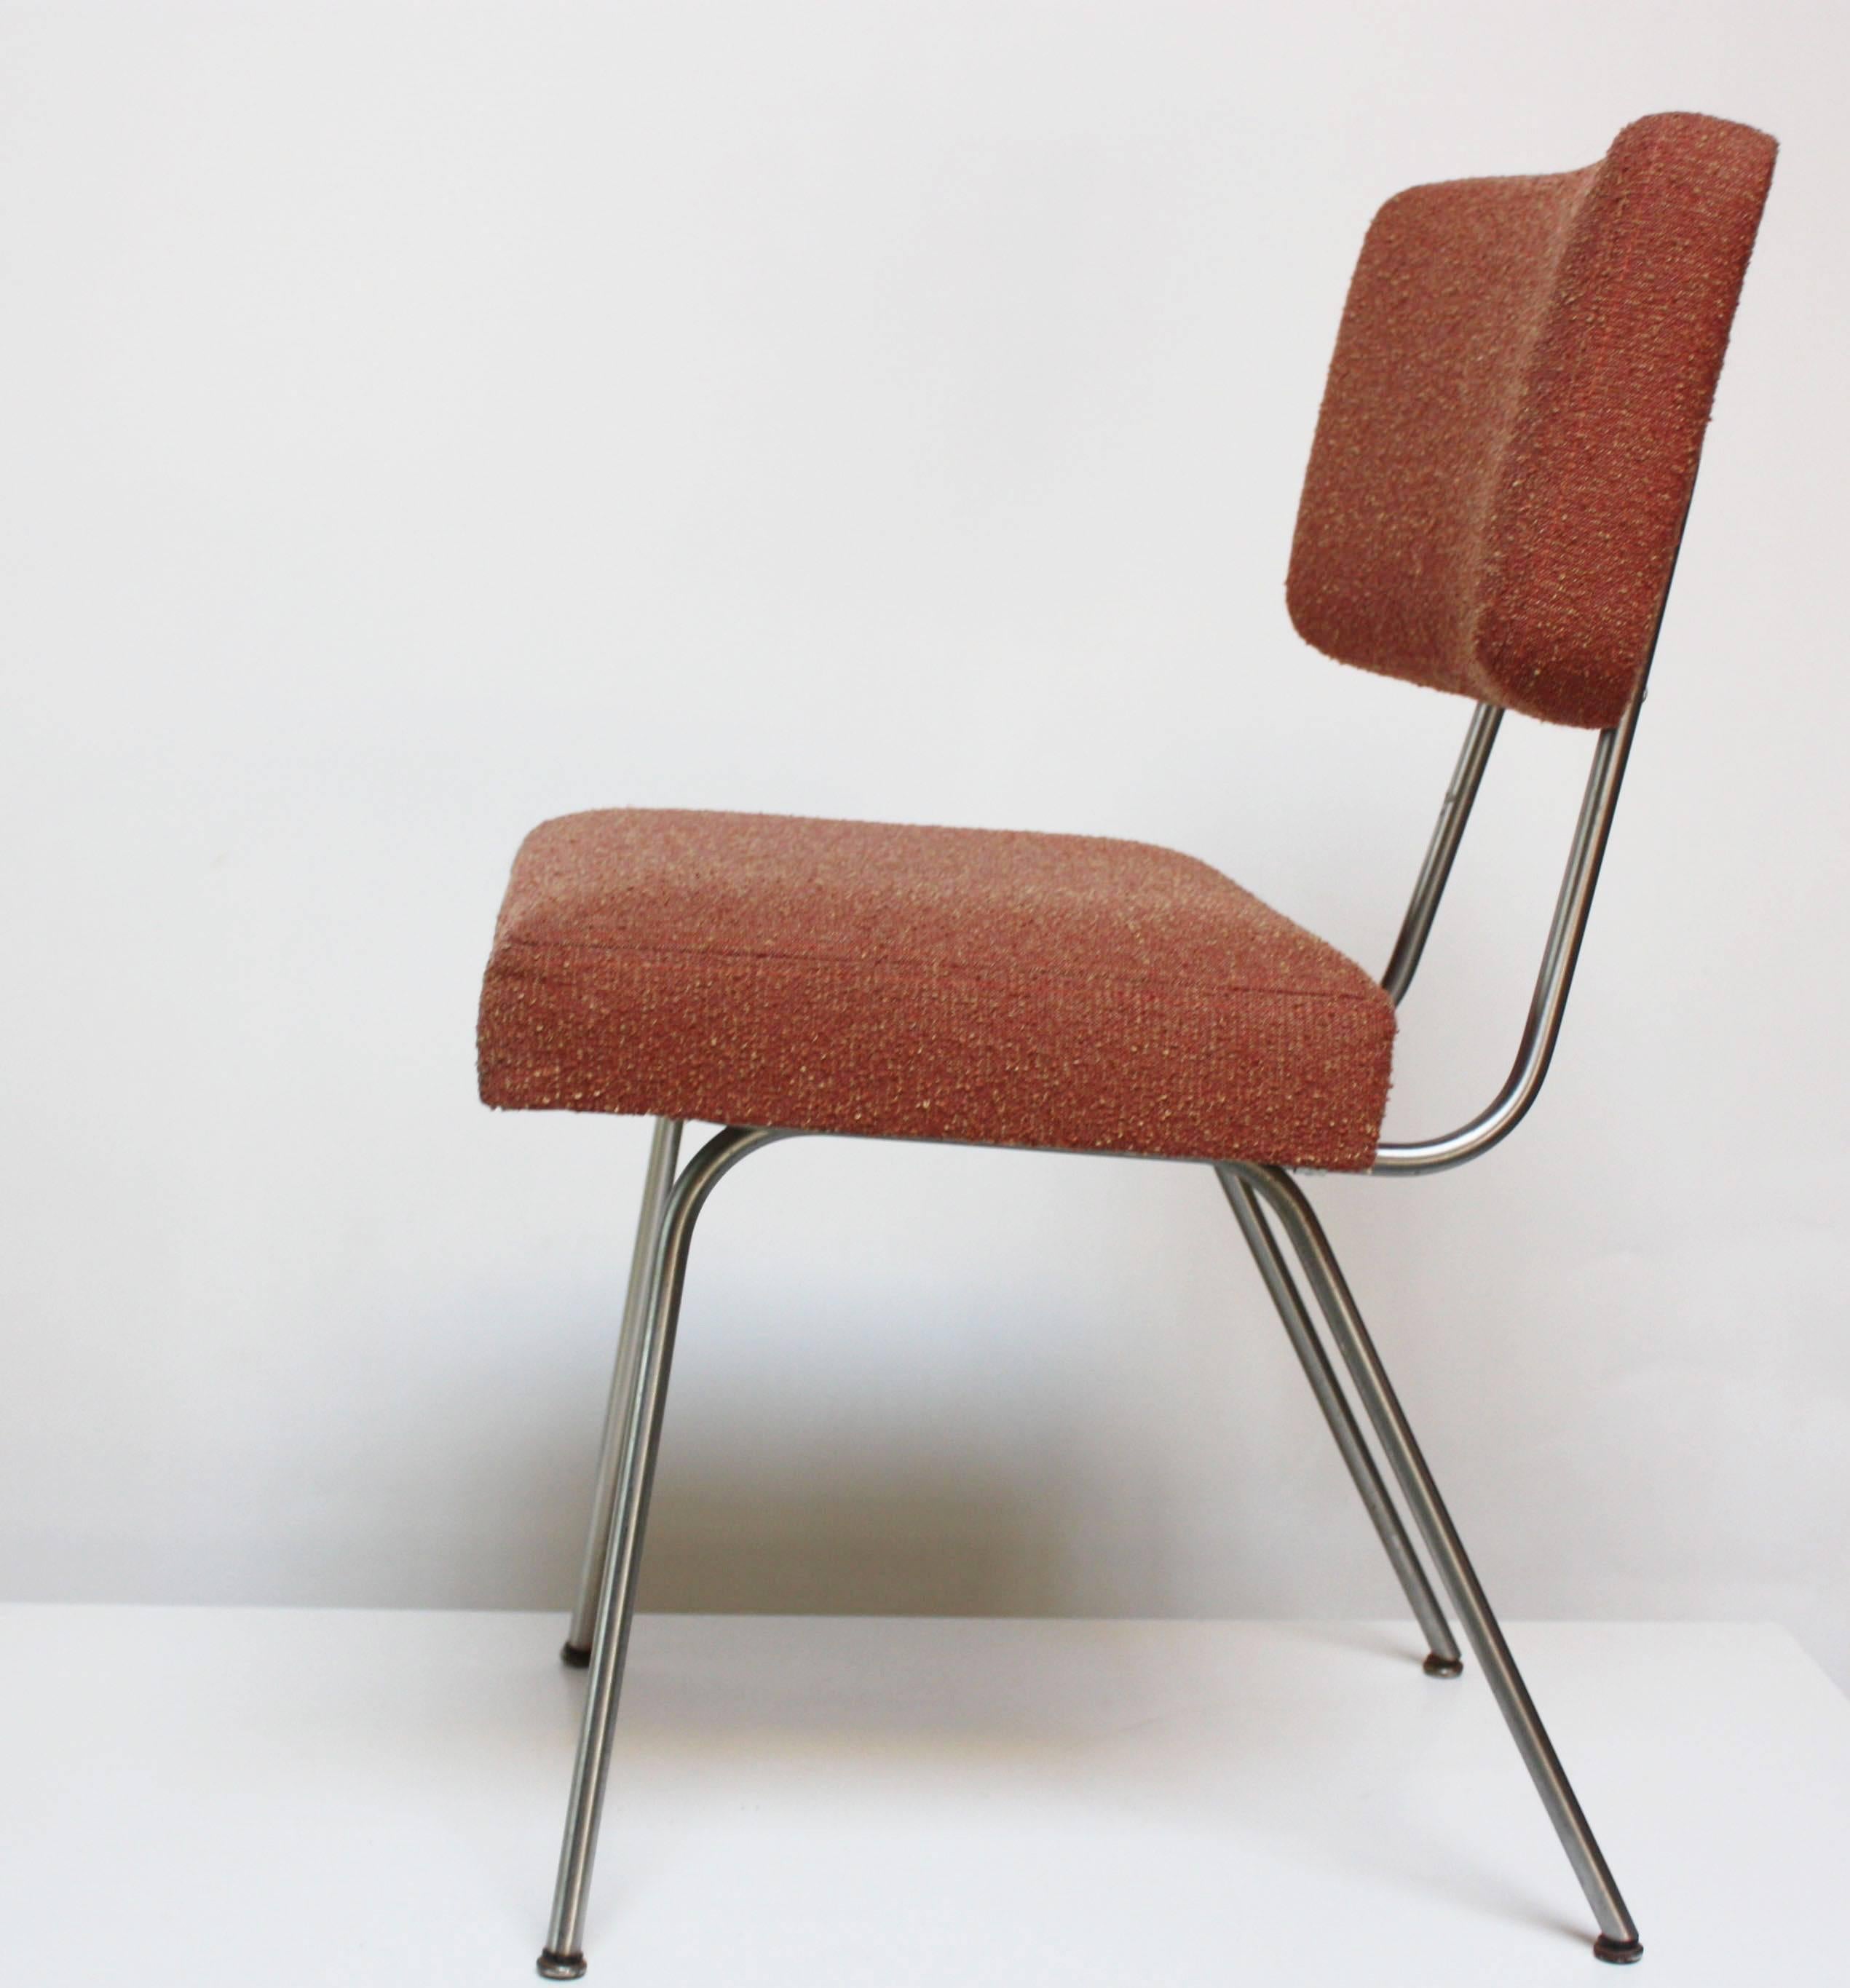 Originally designed for dining use by George Nelson for Herman Miller, these handsome, versatile chairs have such clean and angular lines, they make great accent or desk chairs, particularly when placed where their sharp profile can be seen. The